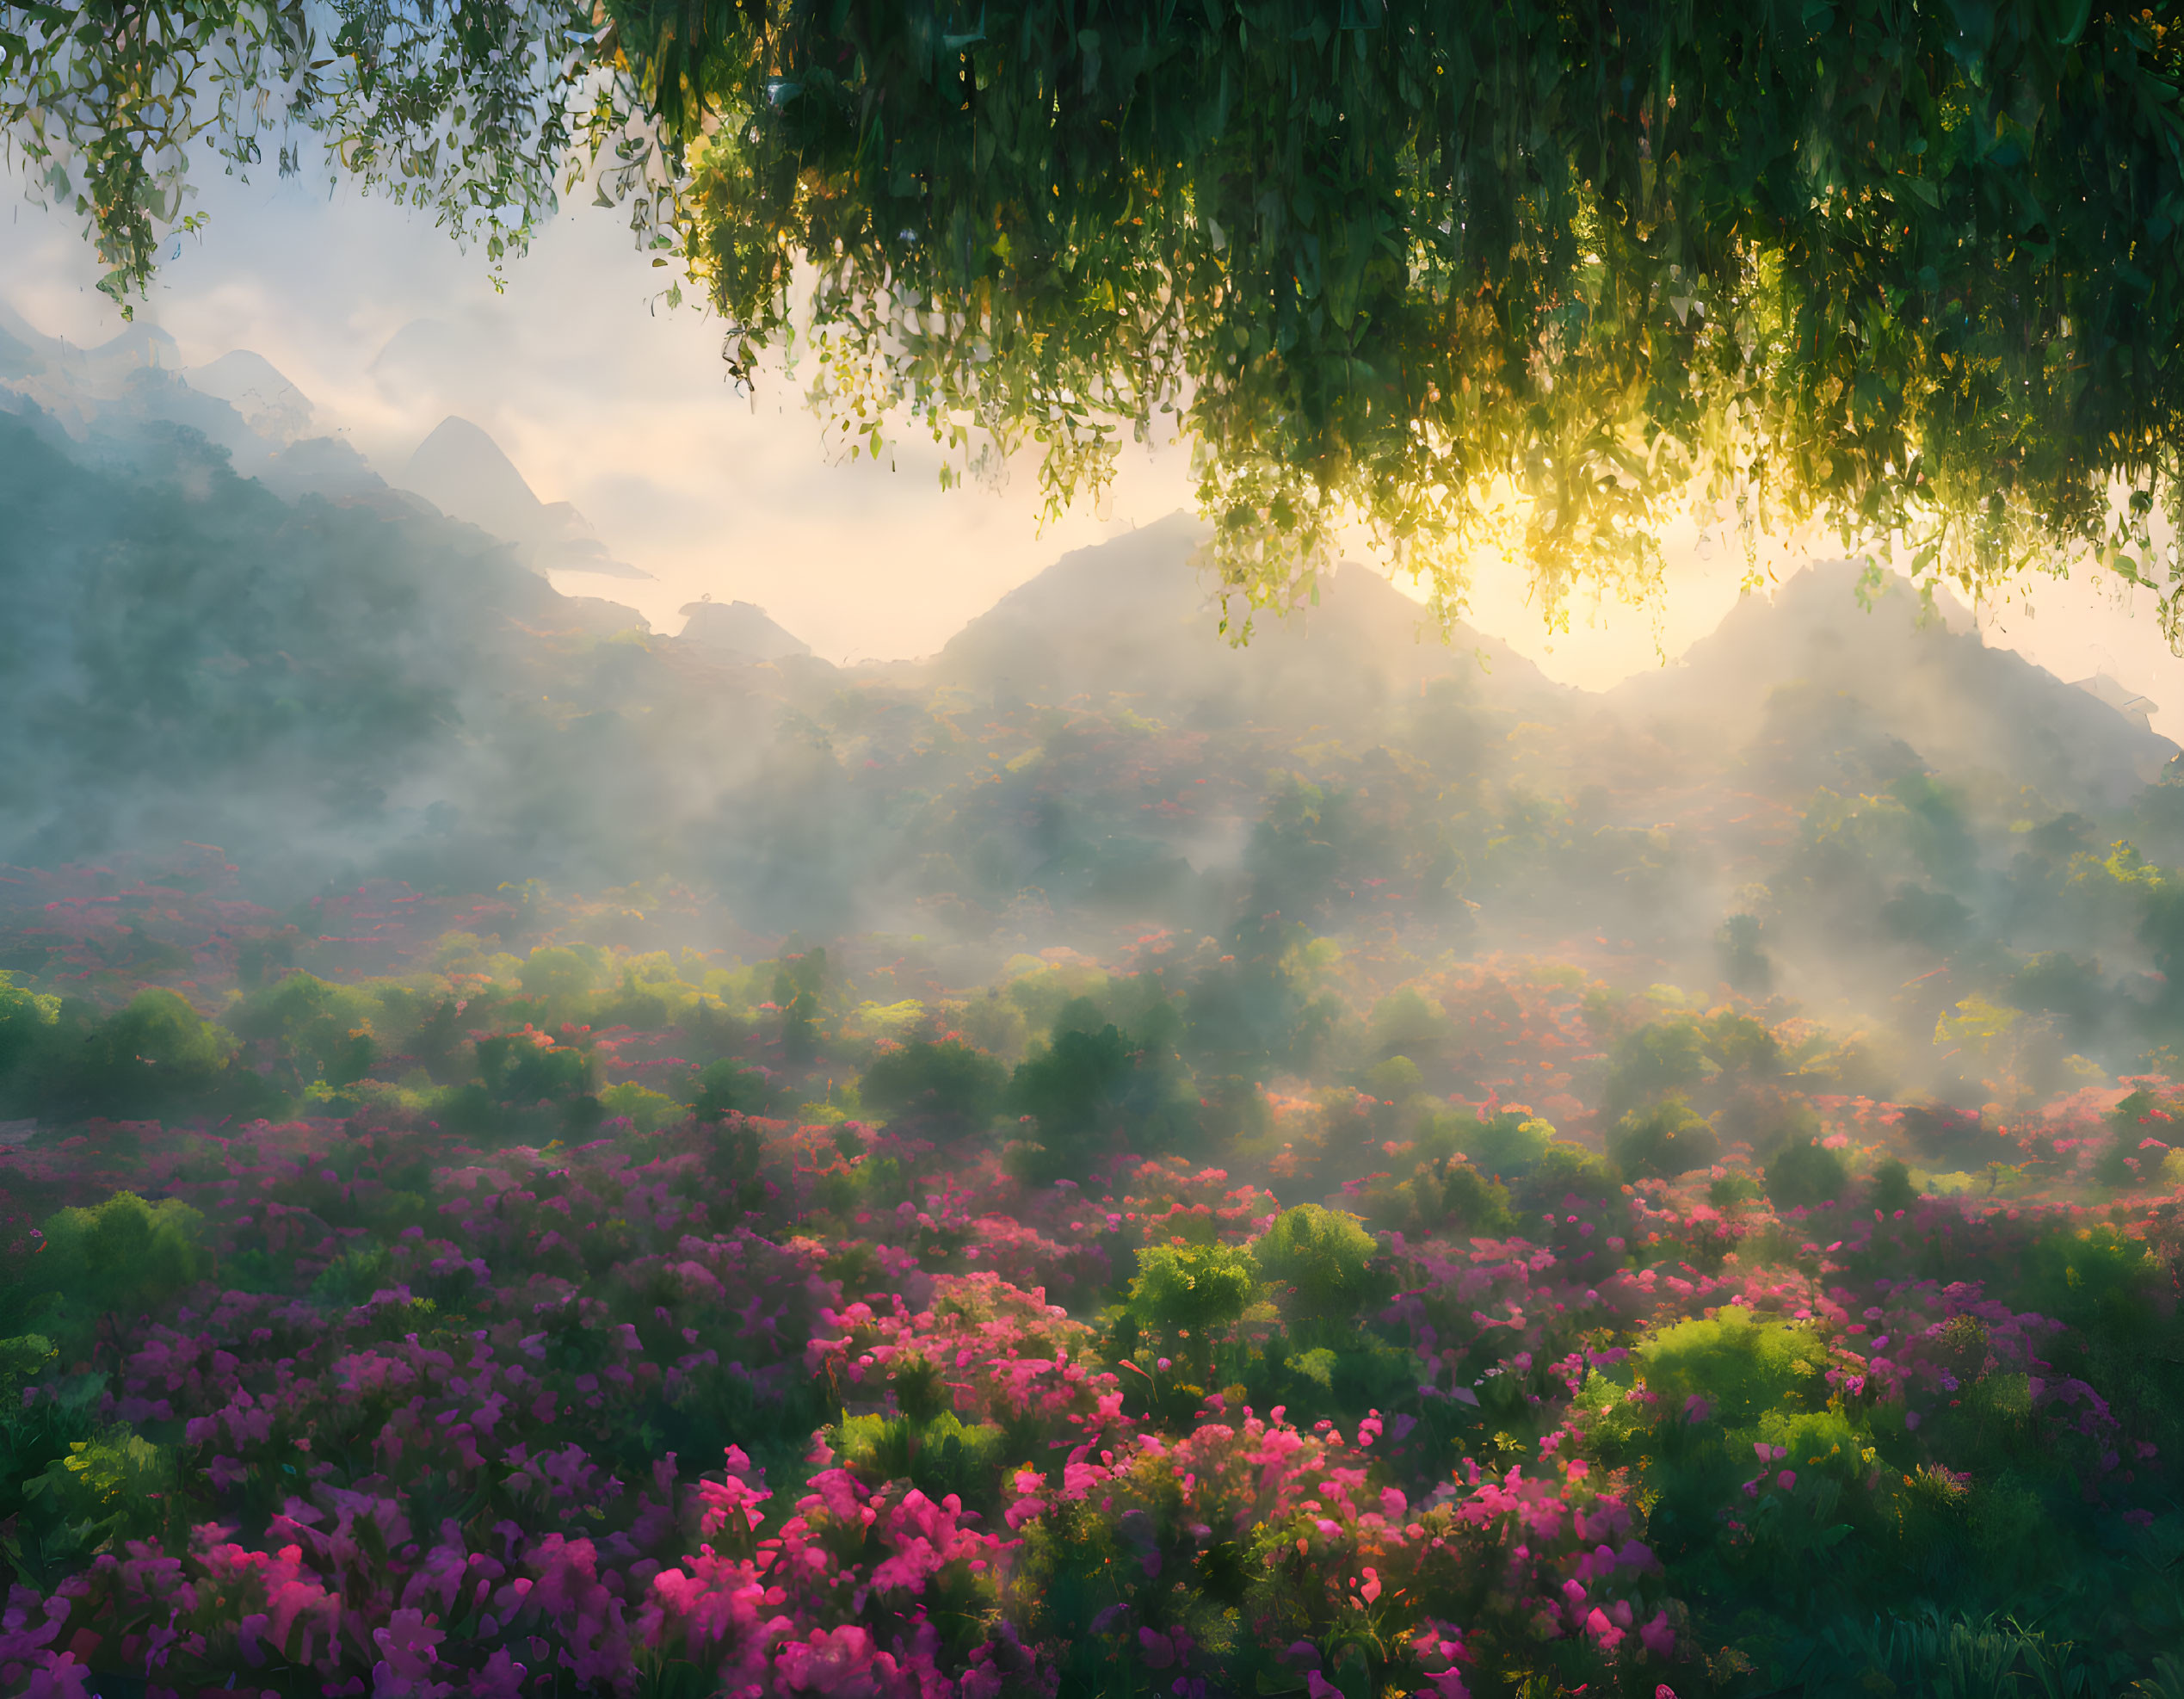 Vibrant pink flowers in lush landscape with misty mountains and warm sun glow